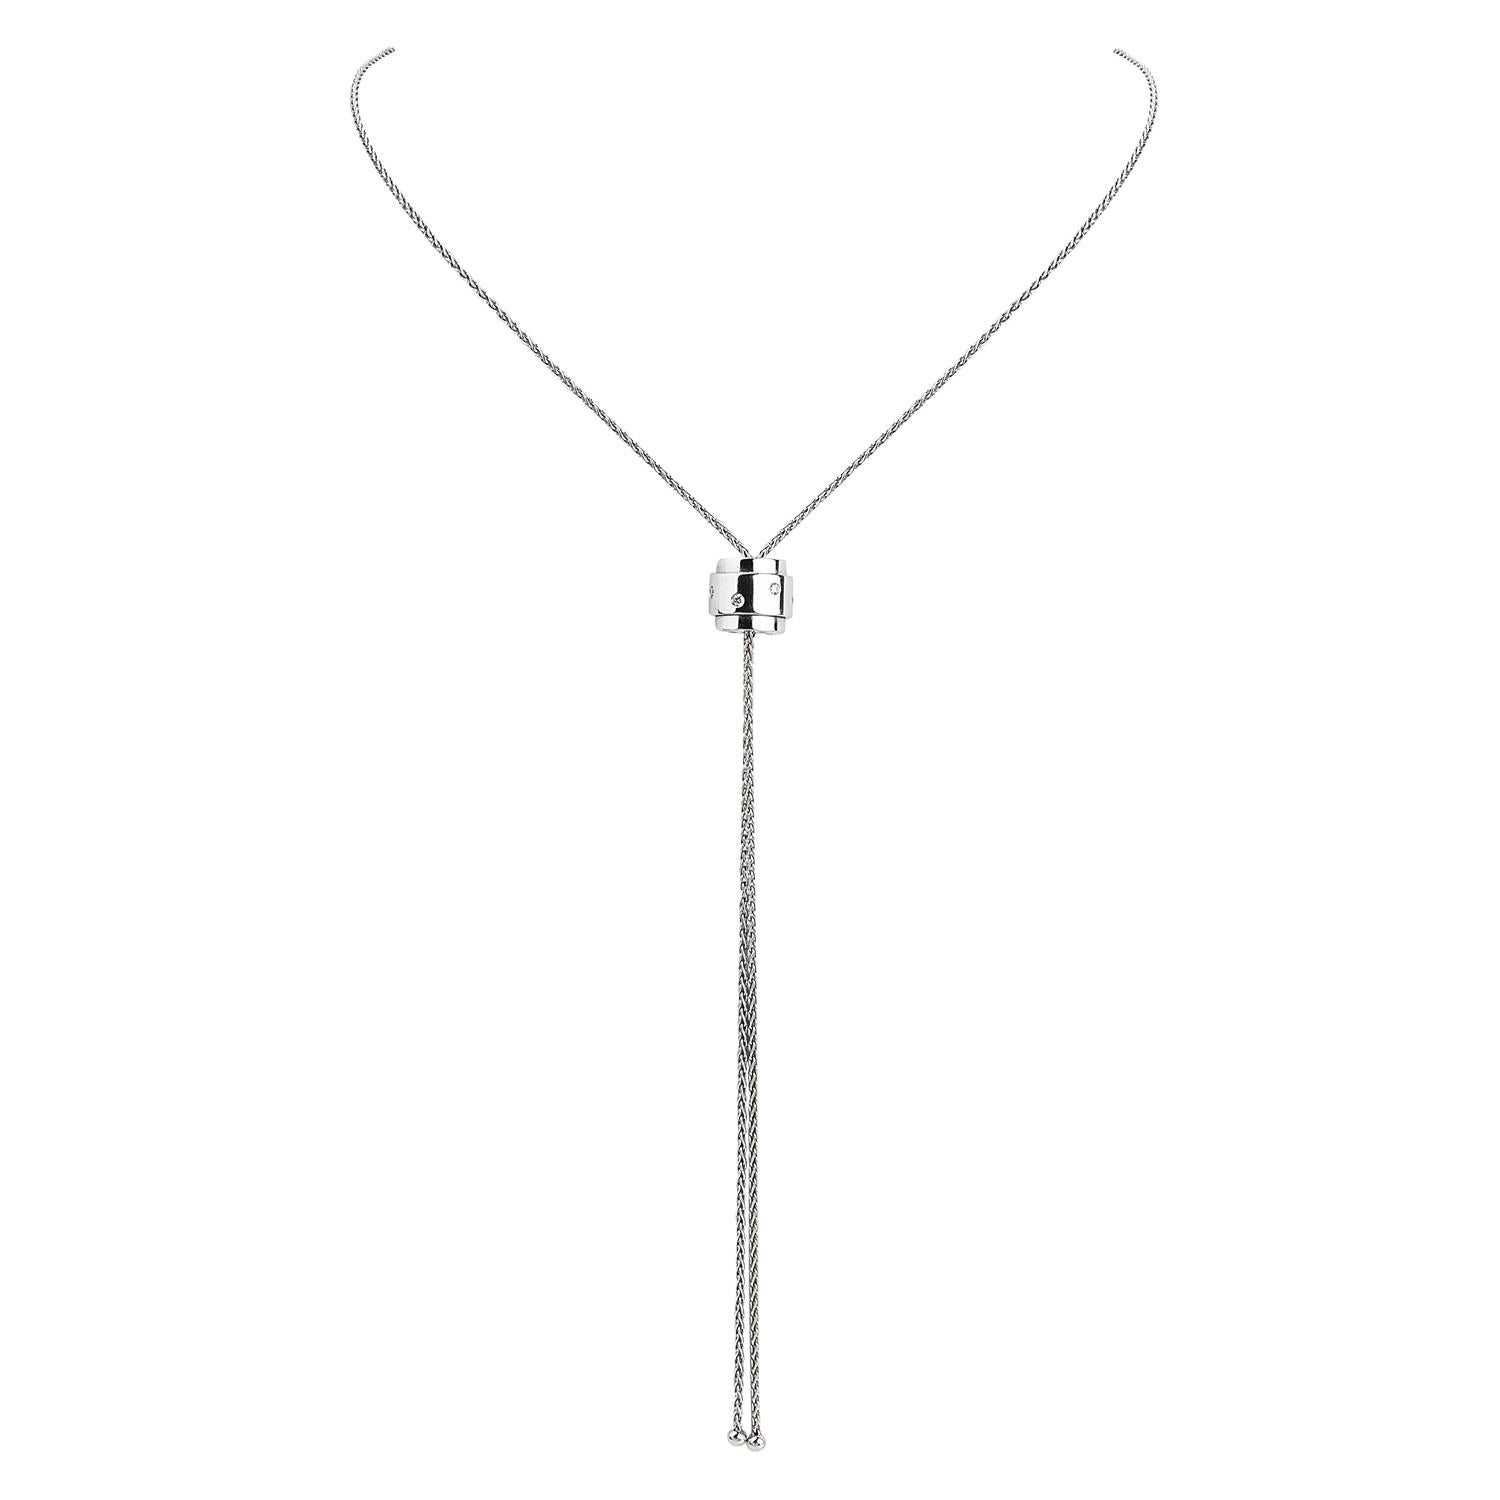 This Piaget  diamond pendant necklace from Possession collection is made in 18k white gold. it featured with The  adjustable single chain and set 

Set with 7 brilliant cut diamonds, weighing approx. 0.20 carats, E-F color, VVS1 Clarity. The pendant